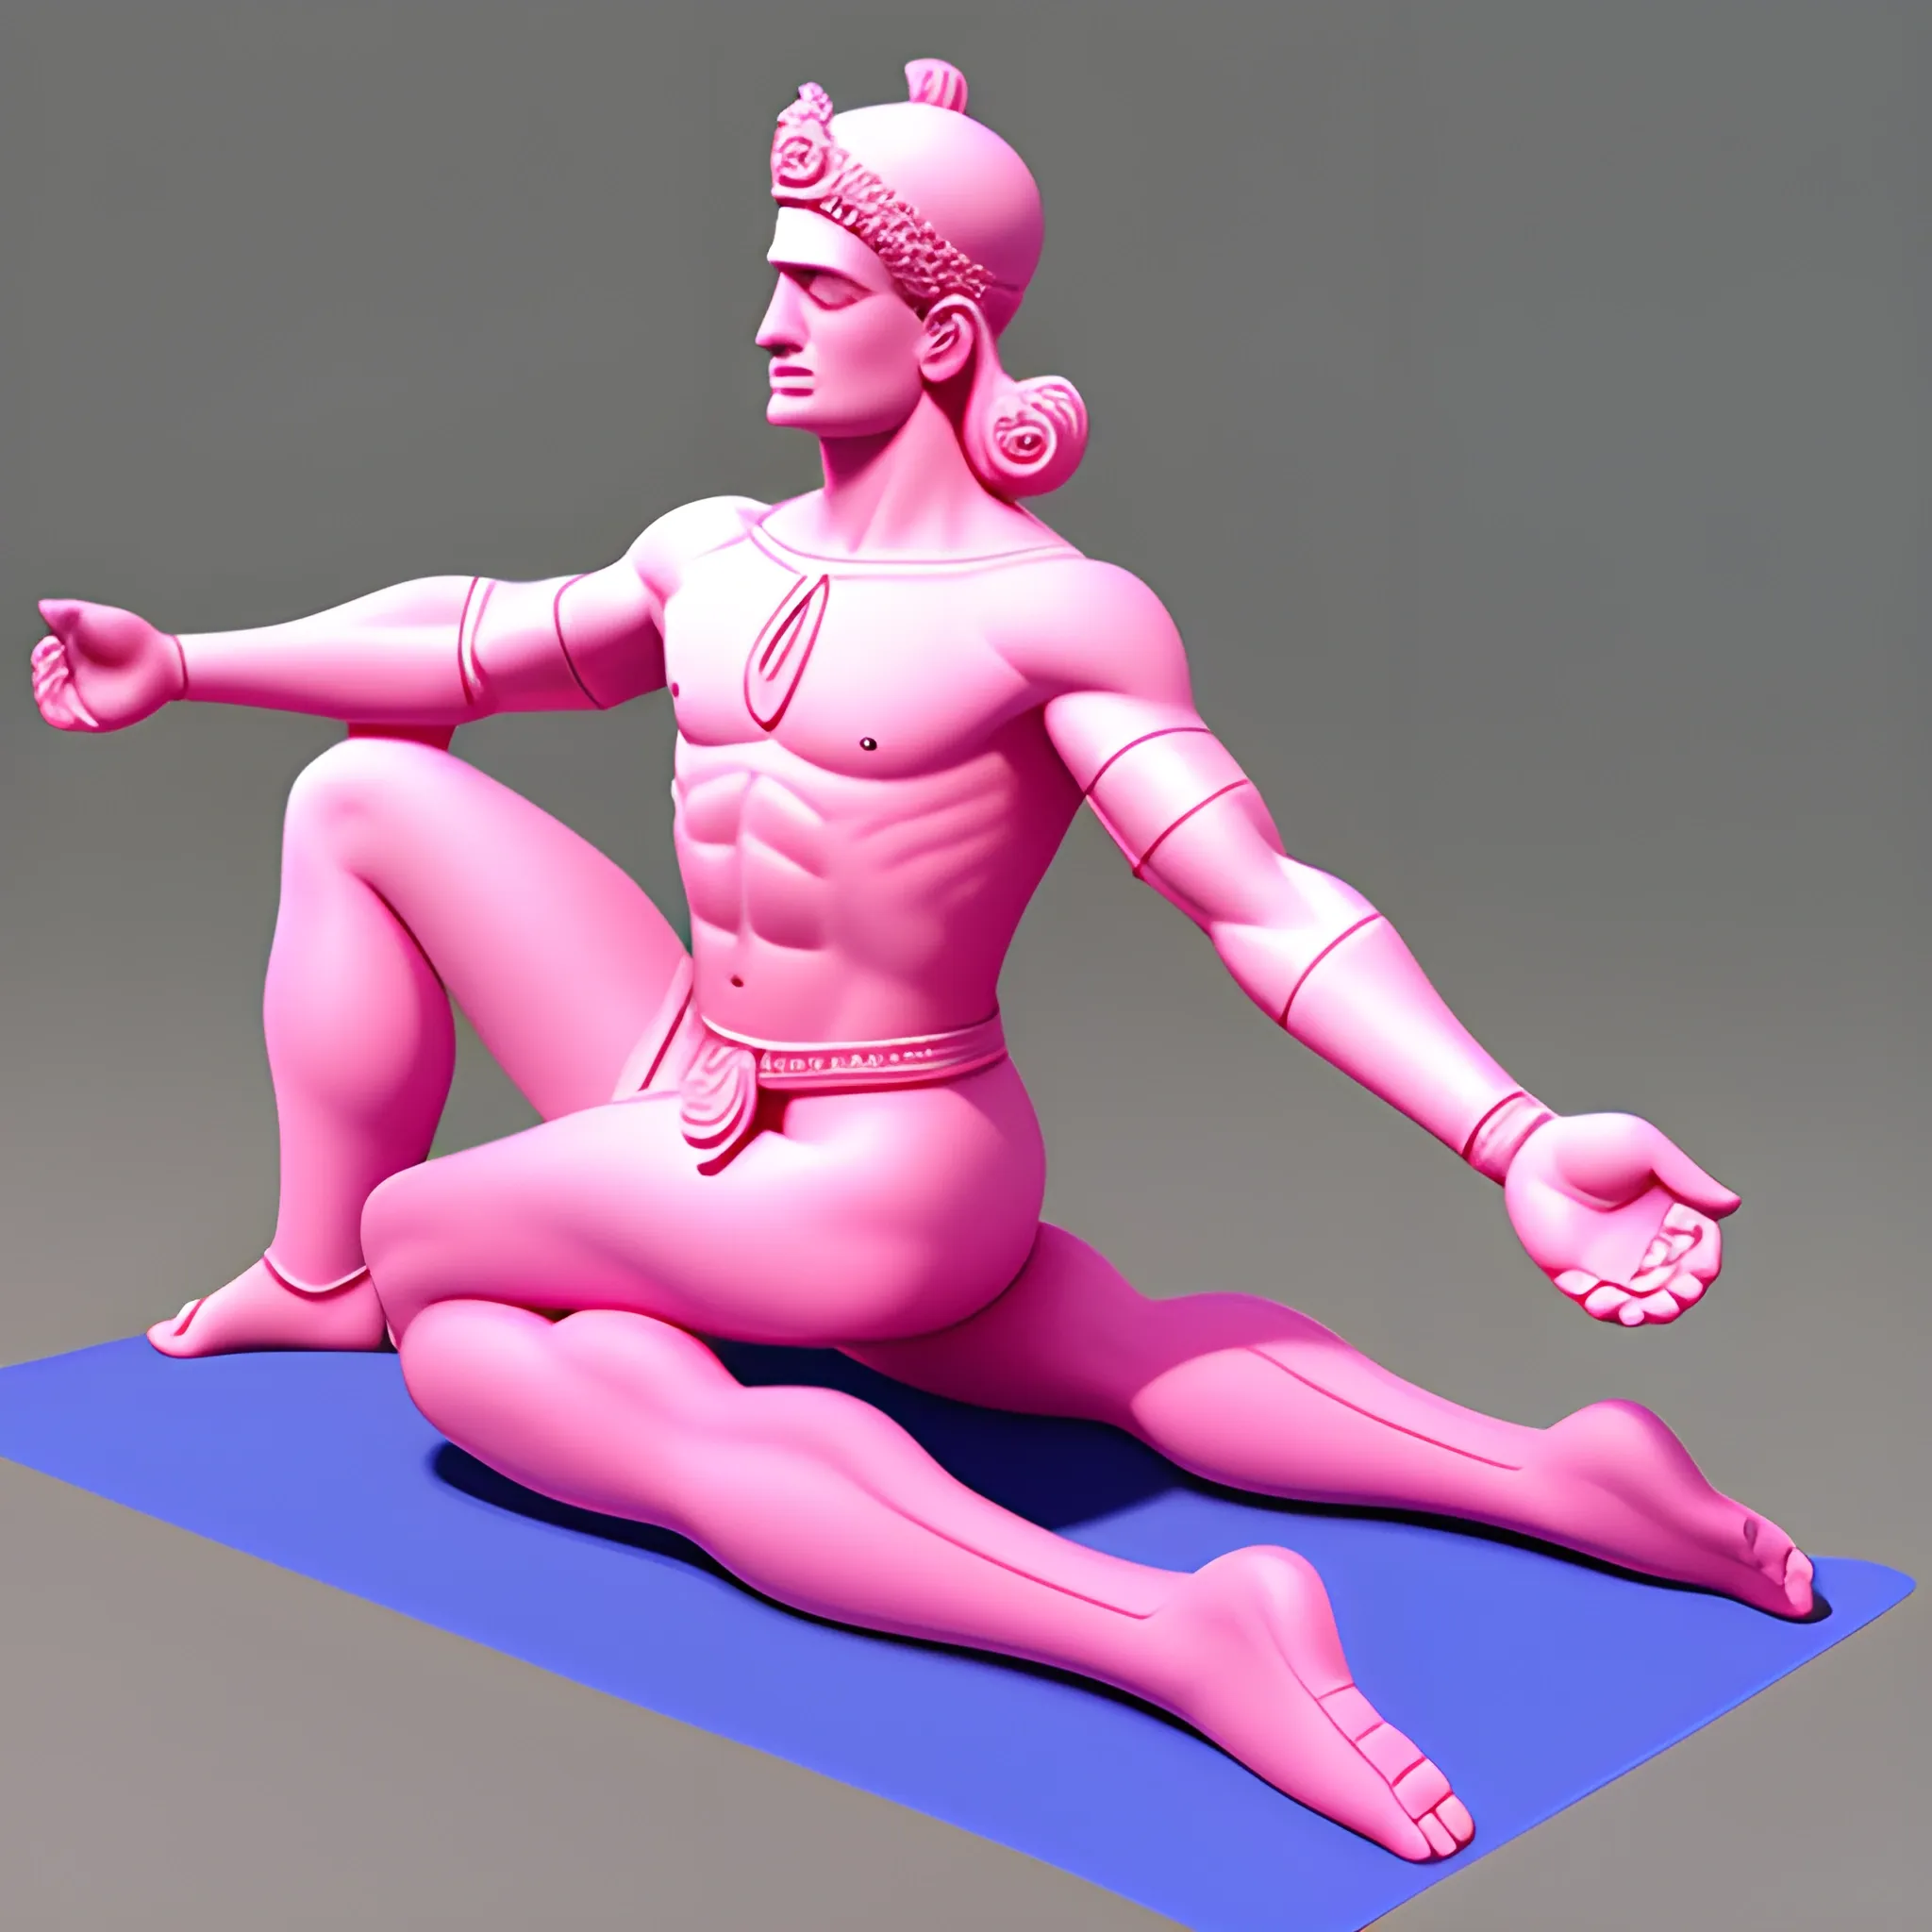 Can you draw a god Hermes wearing pink tights on a yoga mat?, 3D